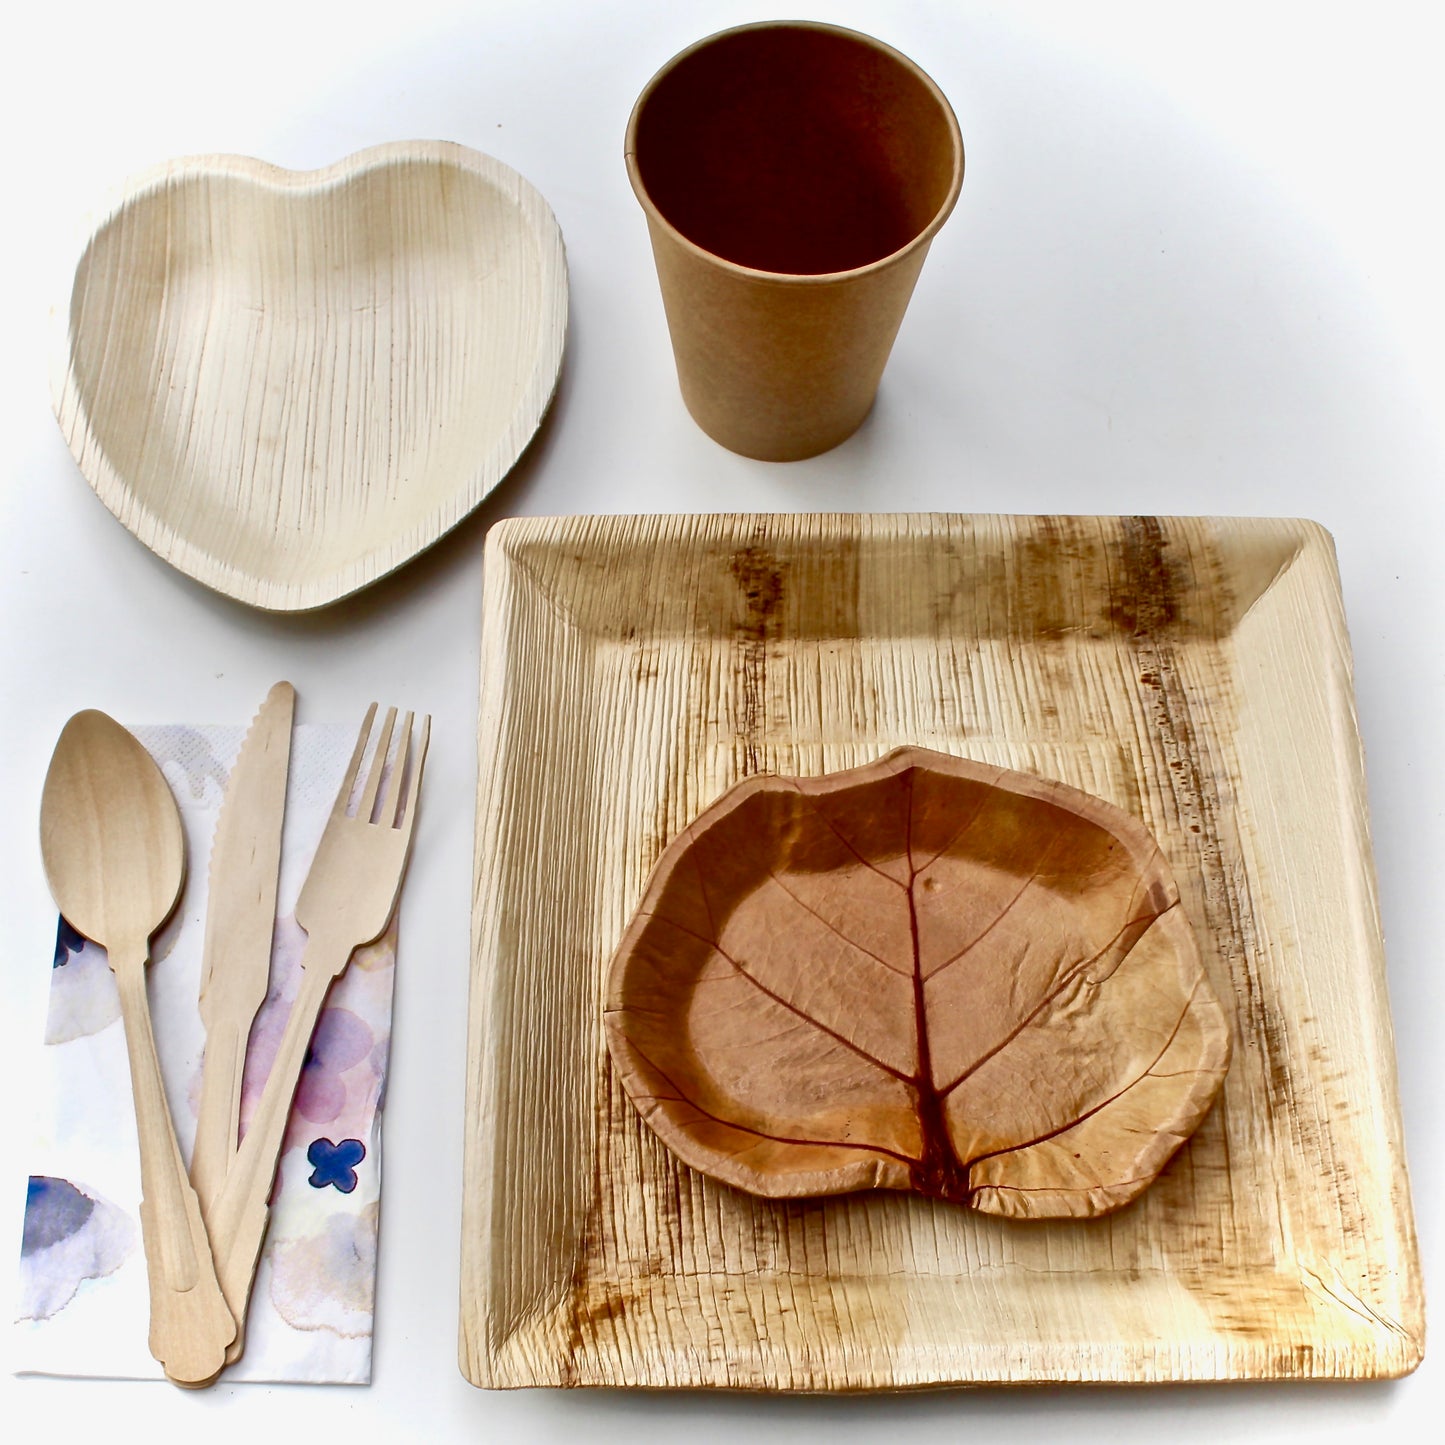 bambo Type plalm Leaf Plate 40 Pic Deep Square 10" - 40 Pic Sea Grape Dessert Plate 7" - 90 Pic Utensils Wood Birch and 40 pic Napkin